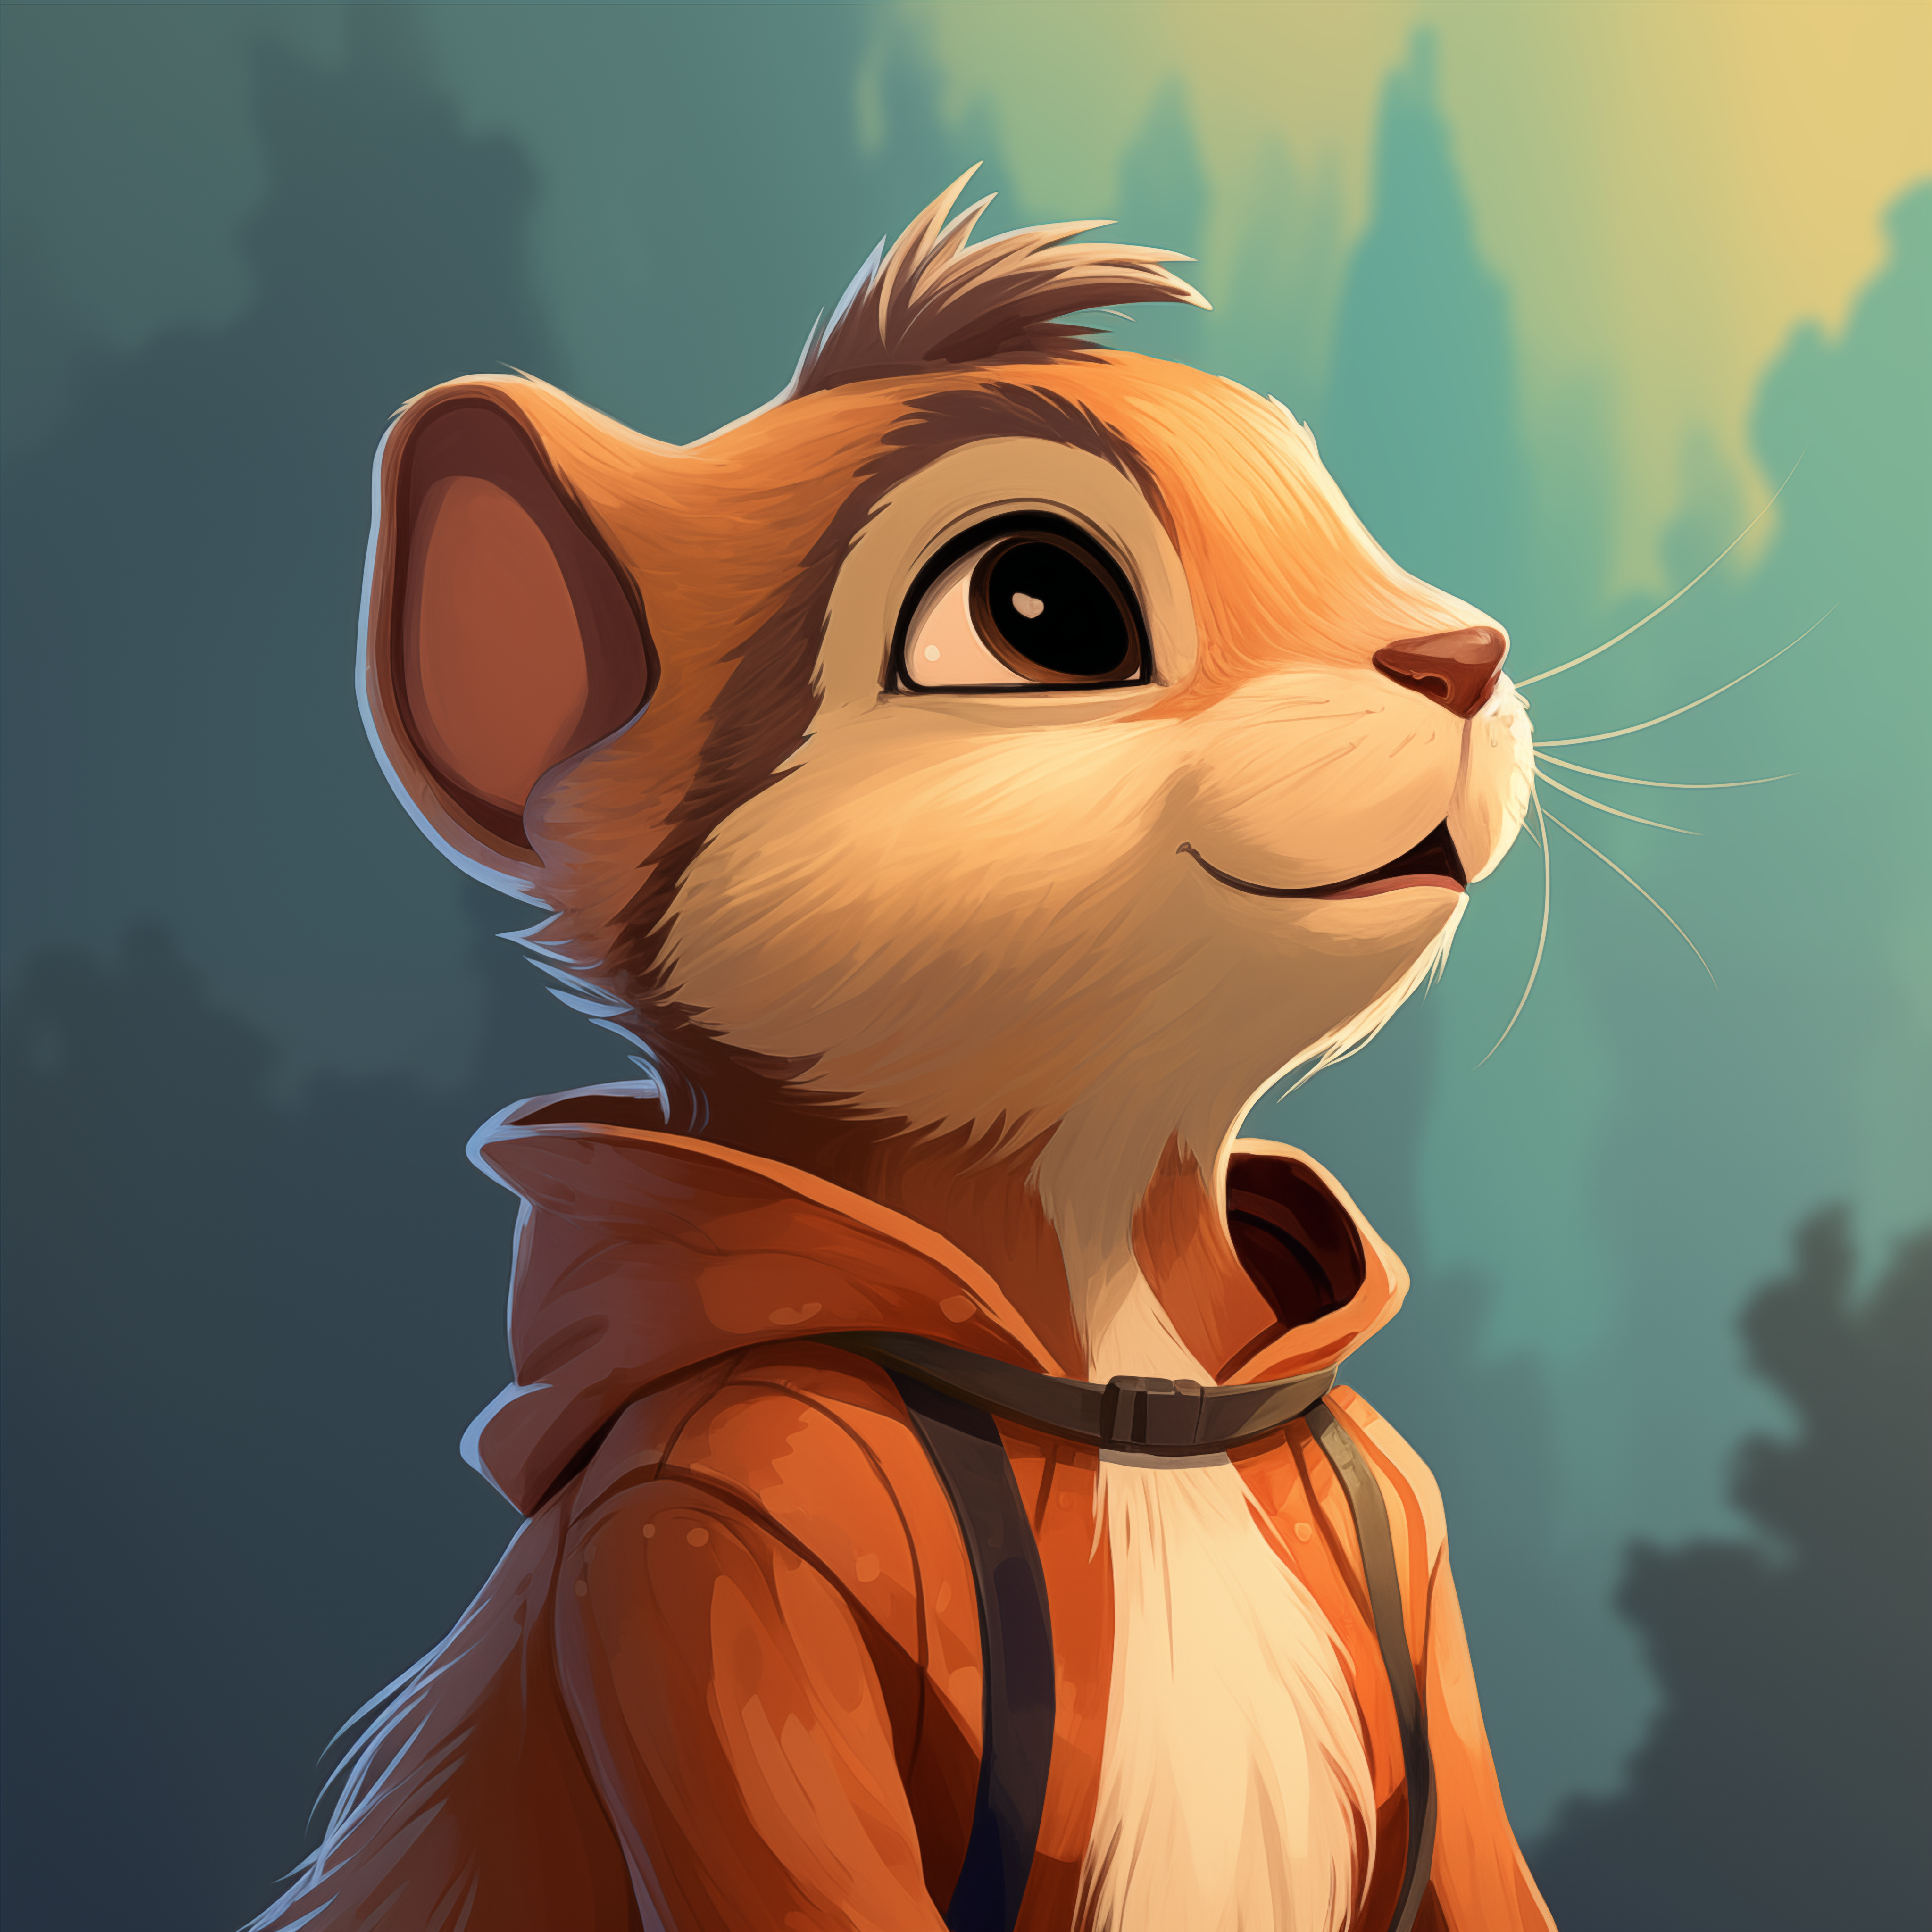 Digital avatar of a stylized chipmunk character wearing a jacket, perfect for a profile picture or PFP.